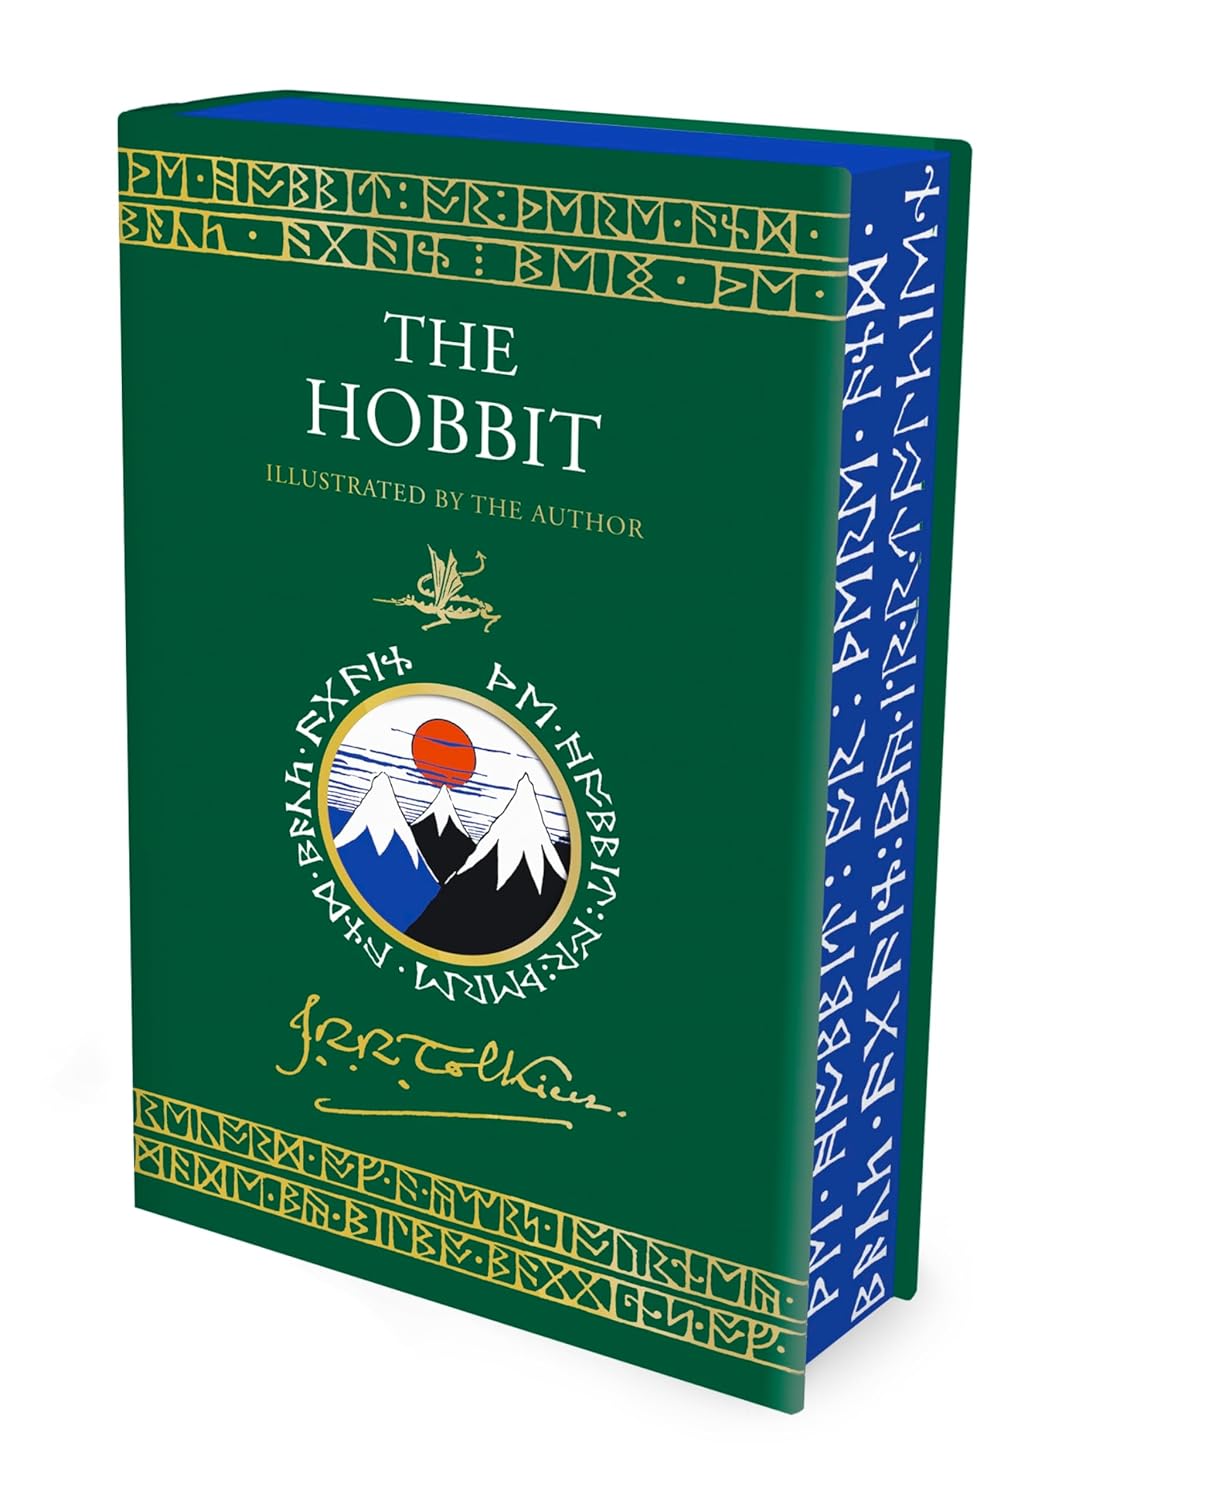 Толкин Джон Рональд Руэл - The Hobbit Illustrated by the Author (Tolkien Illustrated Editions) (+вкладыши)